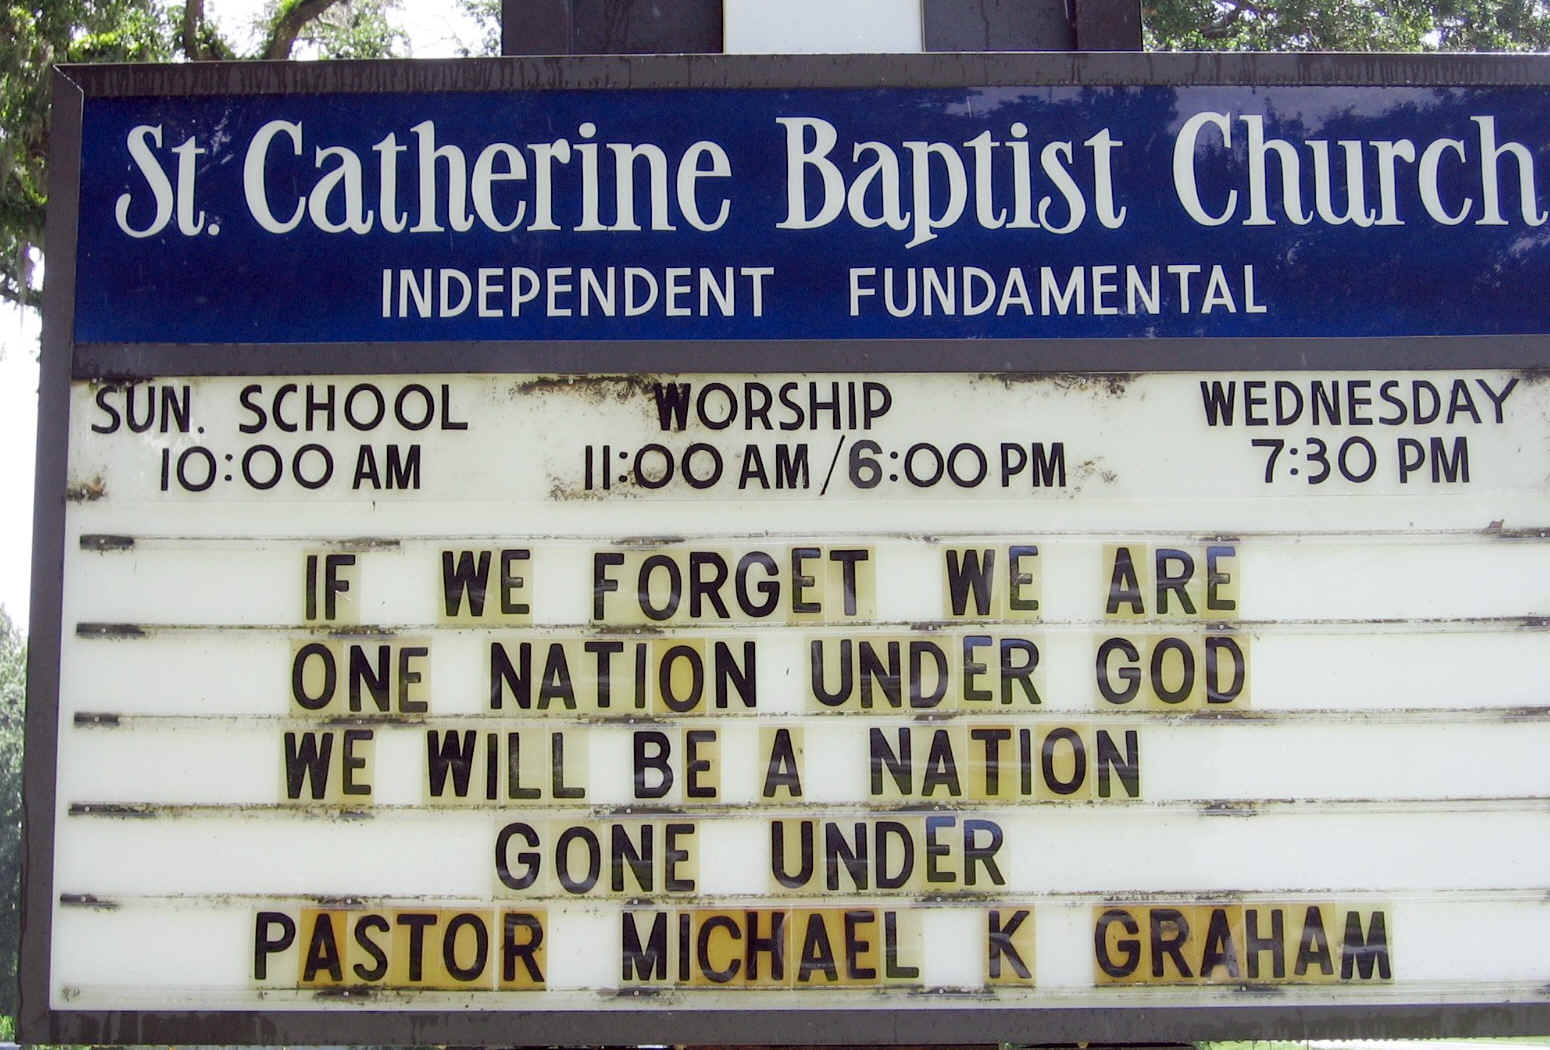 Combination of church and state message on church sign